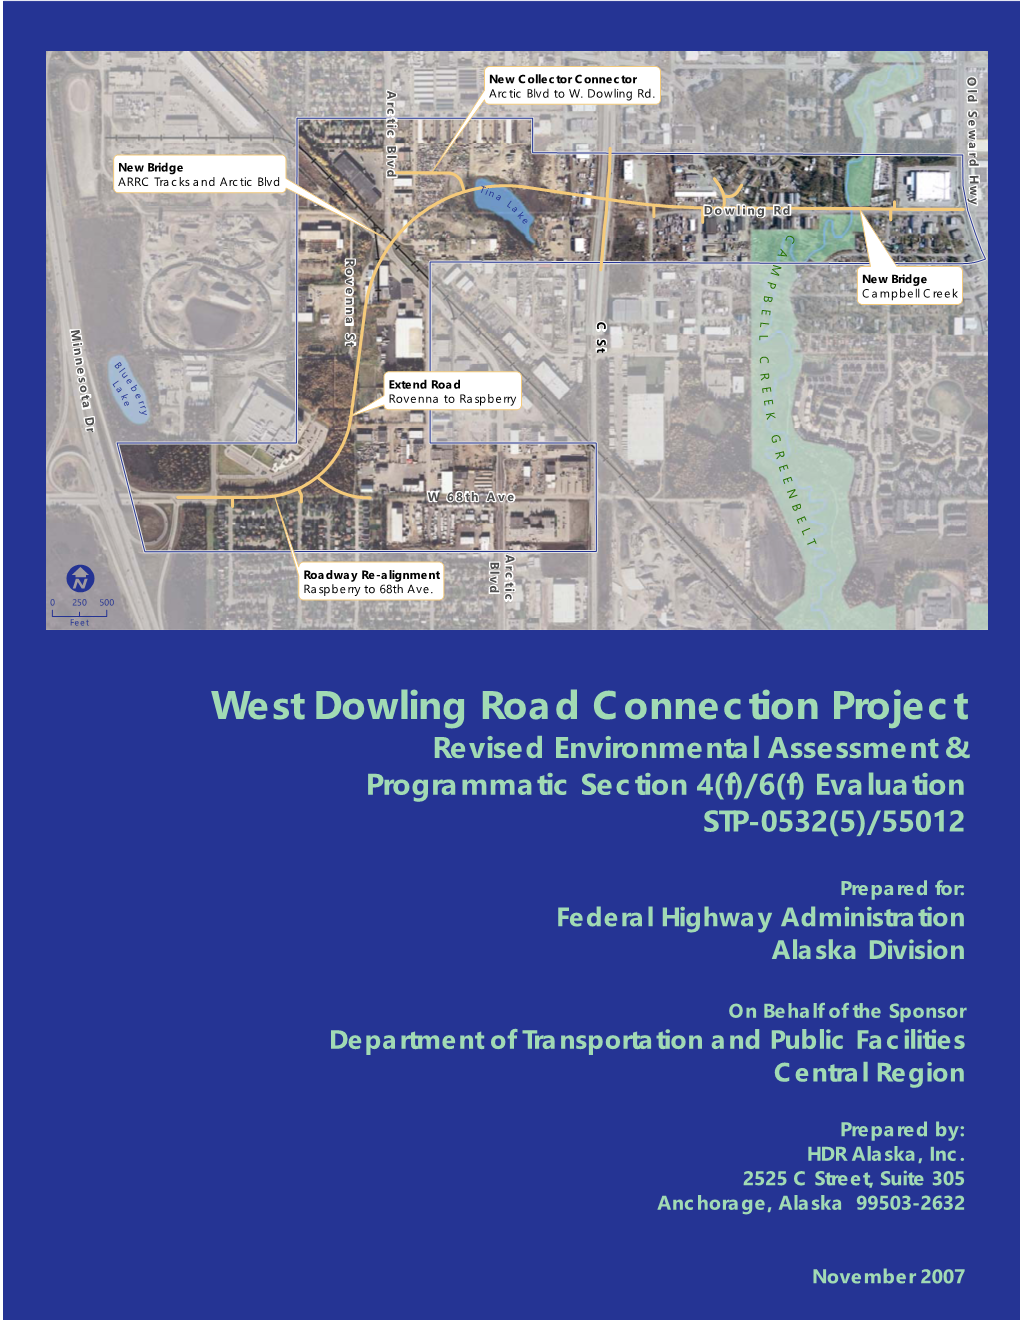 West Dowling Road Connection Project Revised Environmental Assessment & Programmatic Section 4(F)/6(F) Evaluation STP-0532(5)/55012